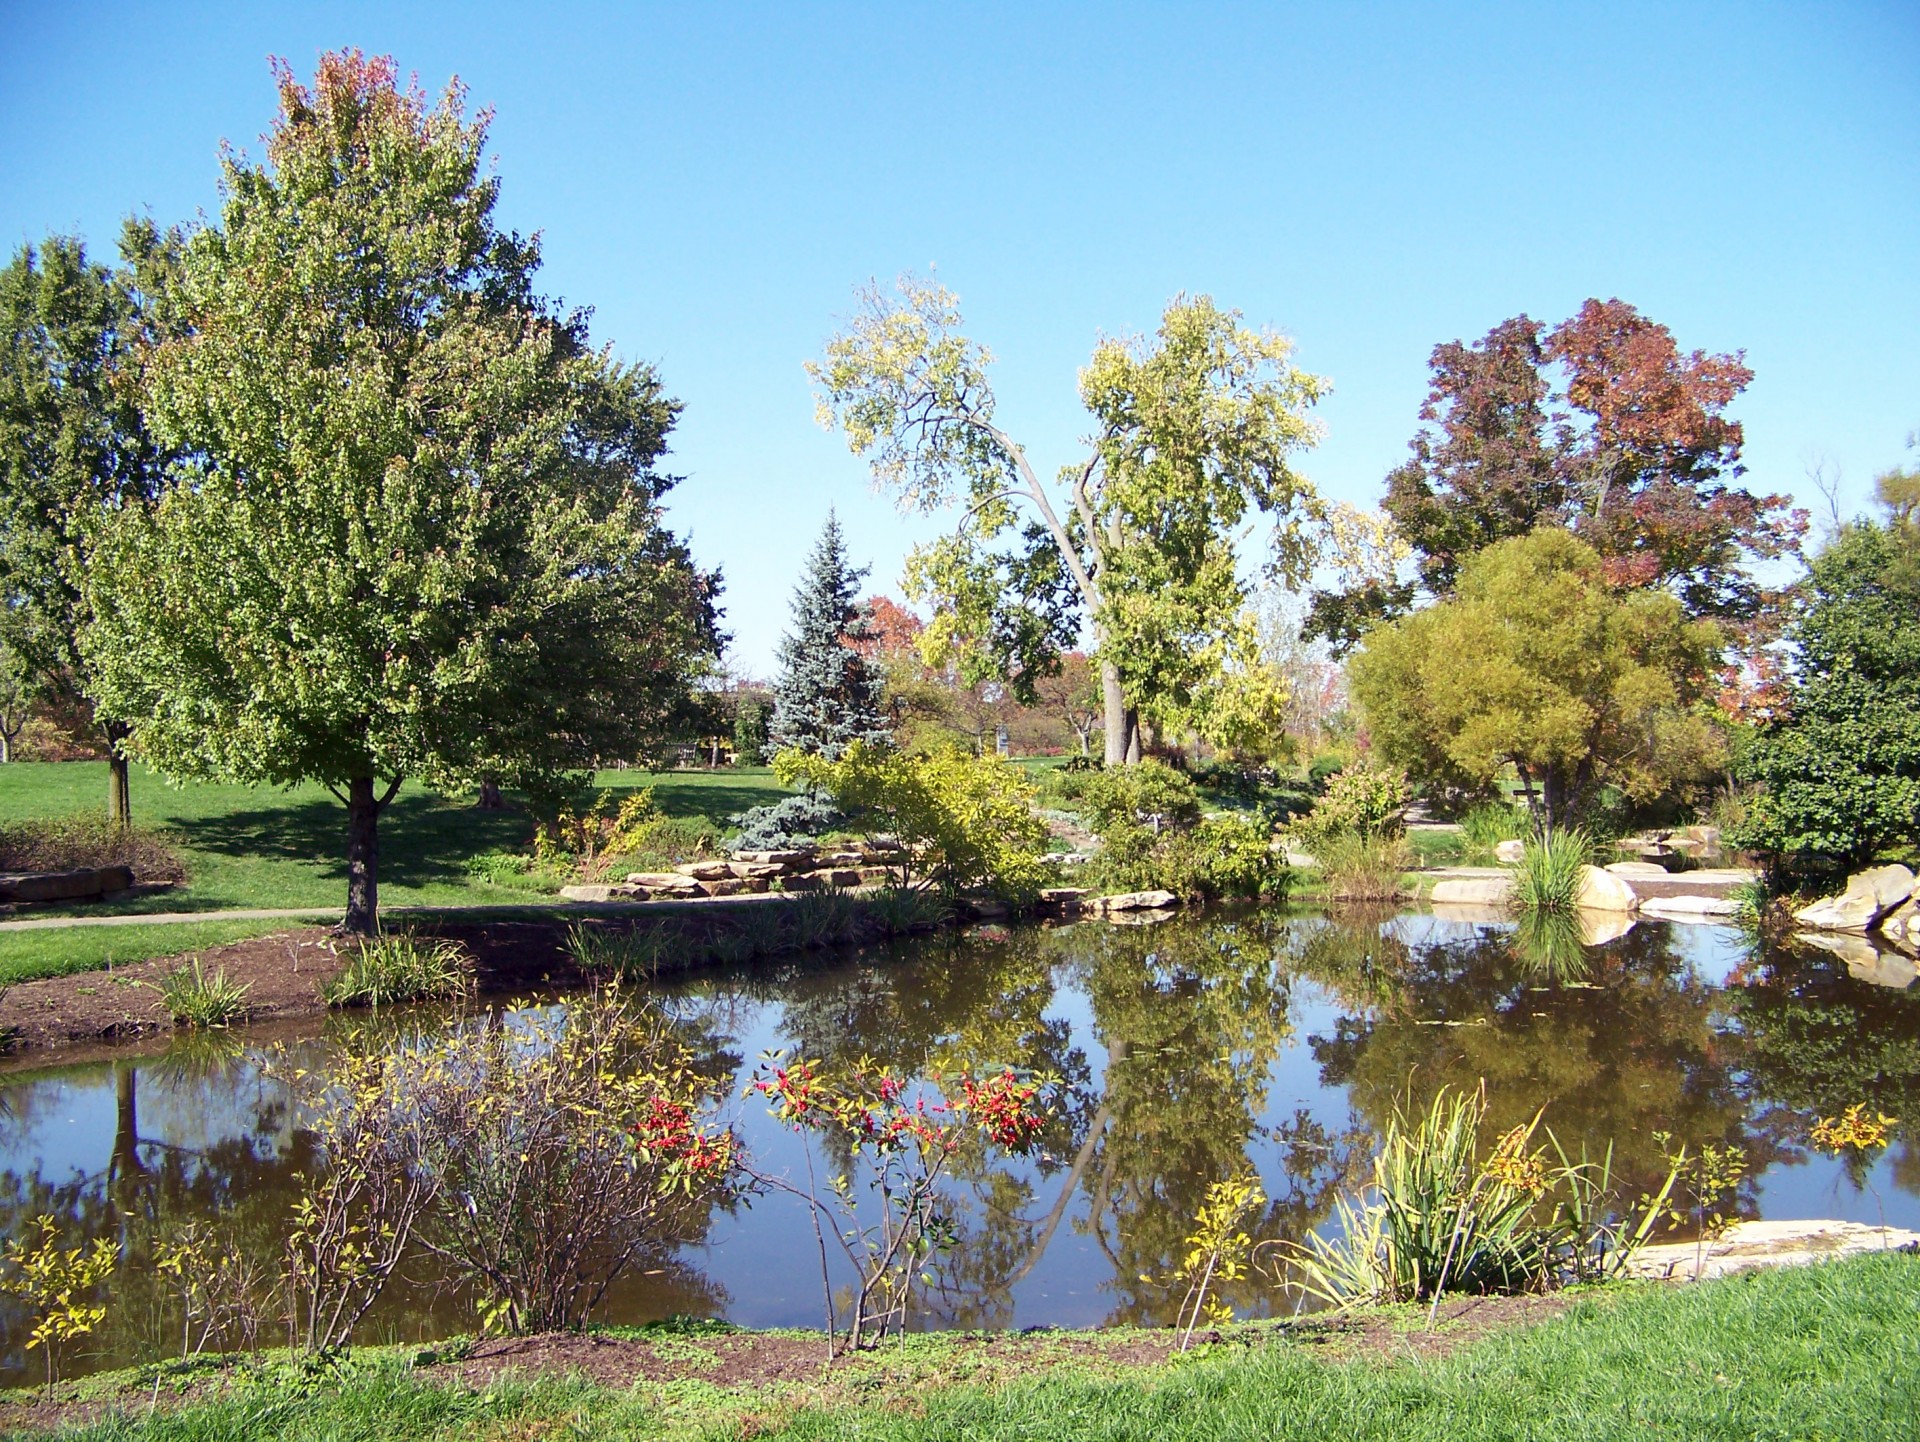 A pond in a park in late summer